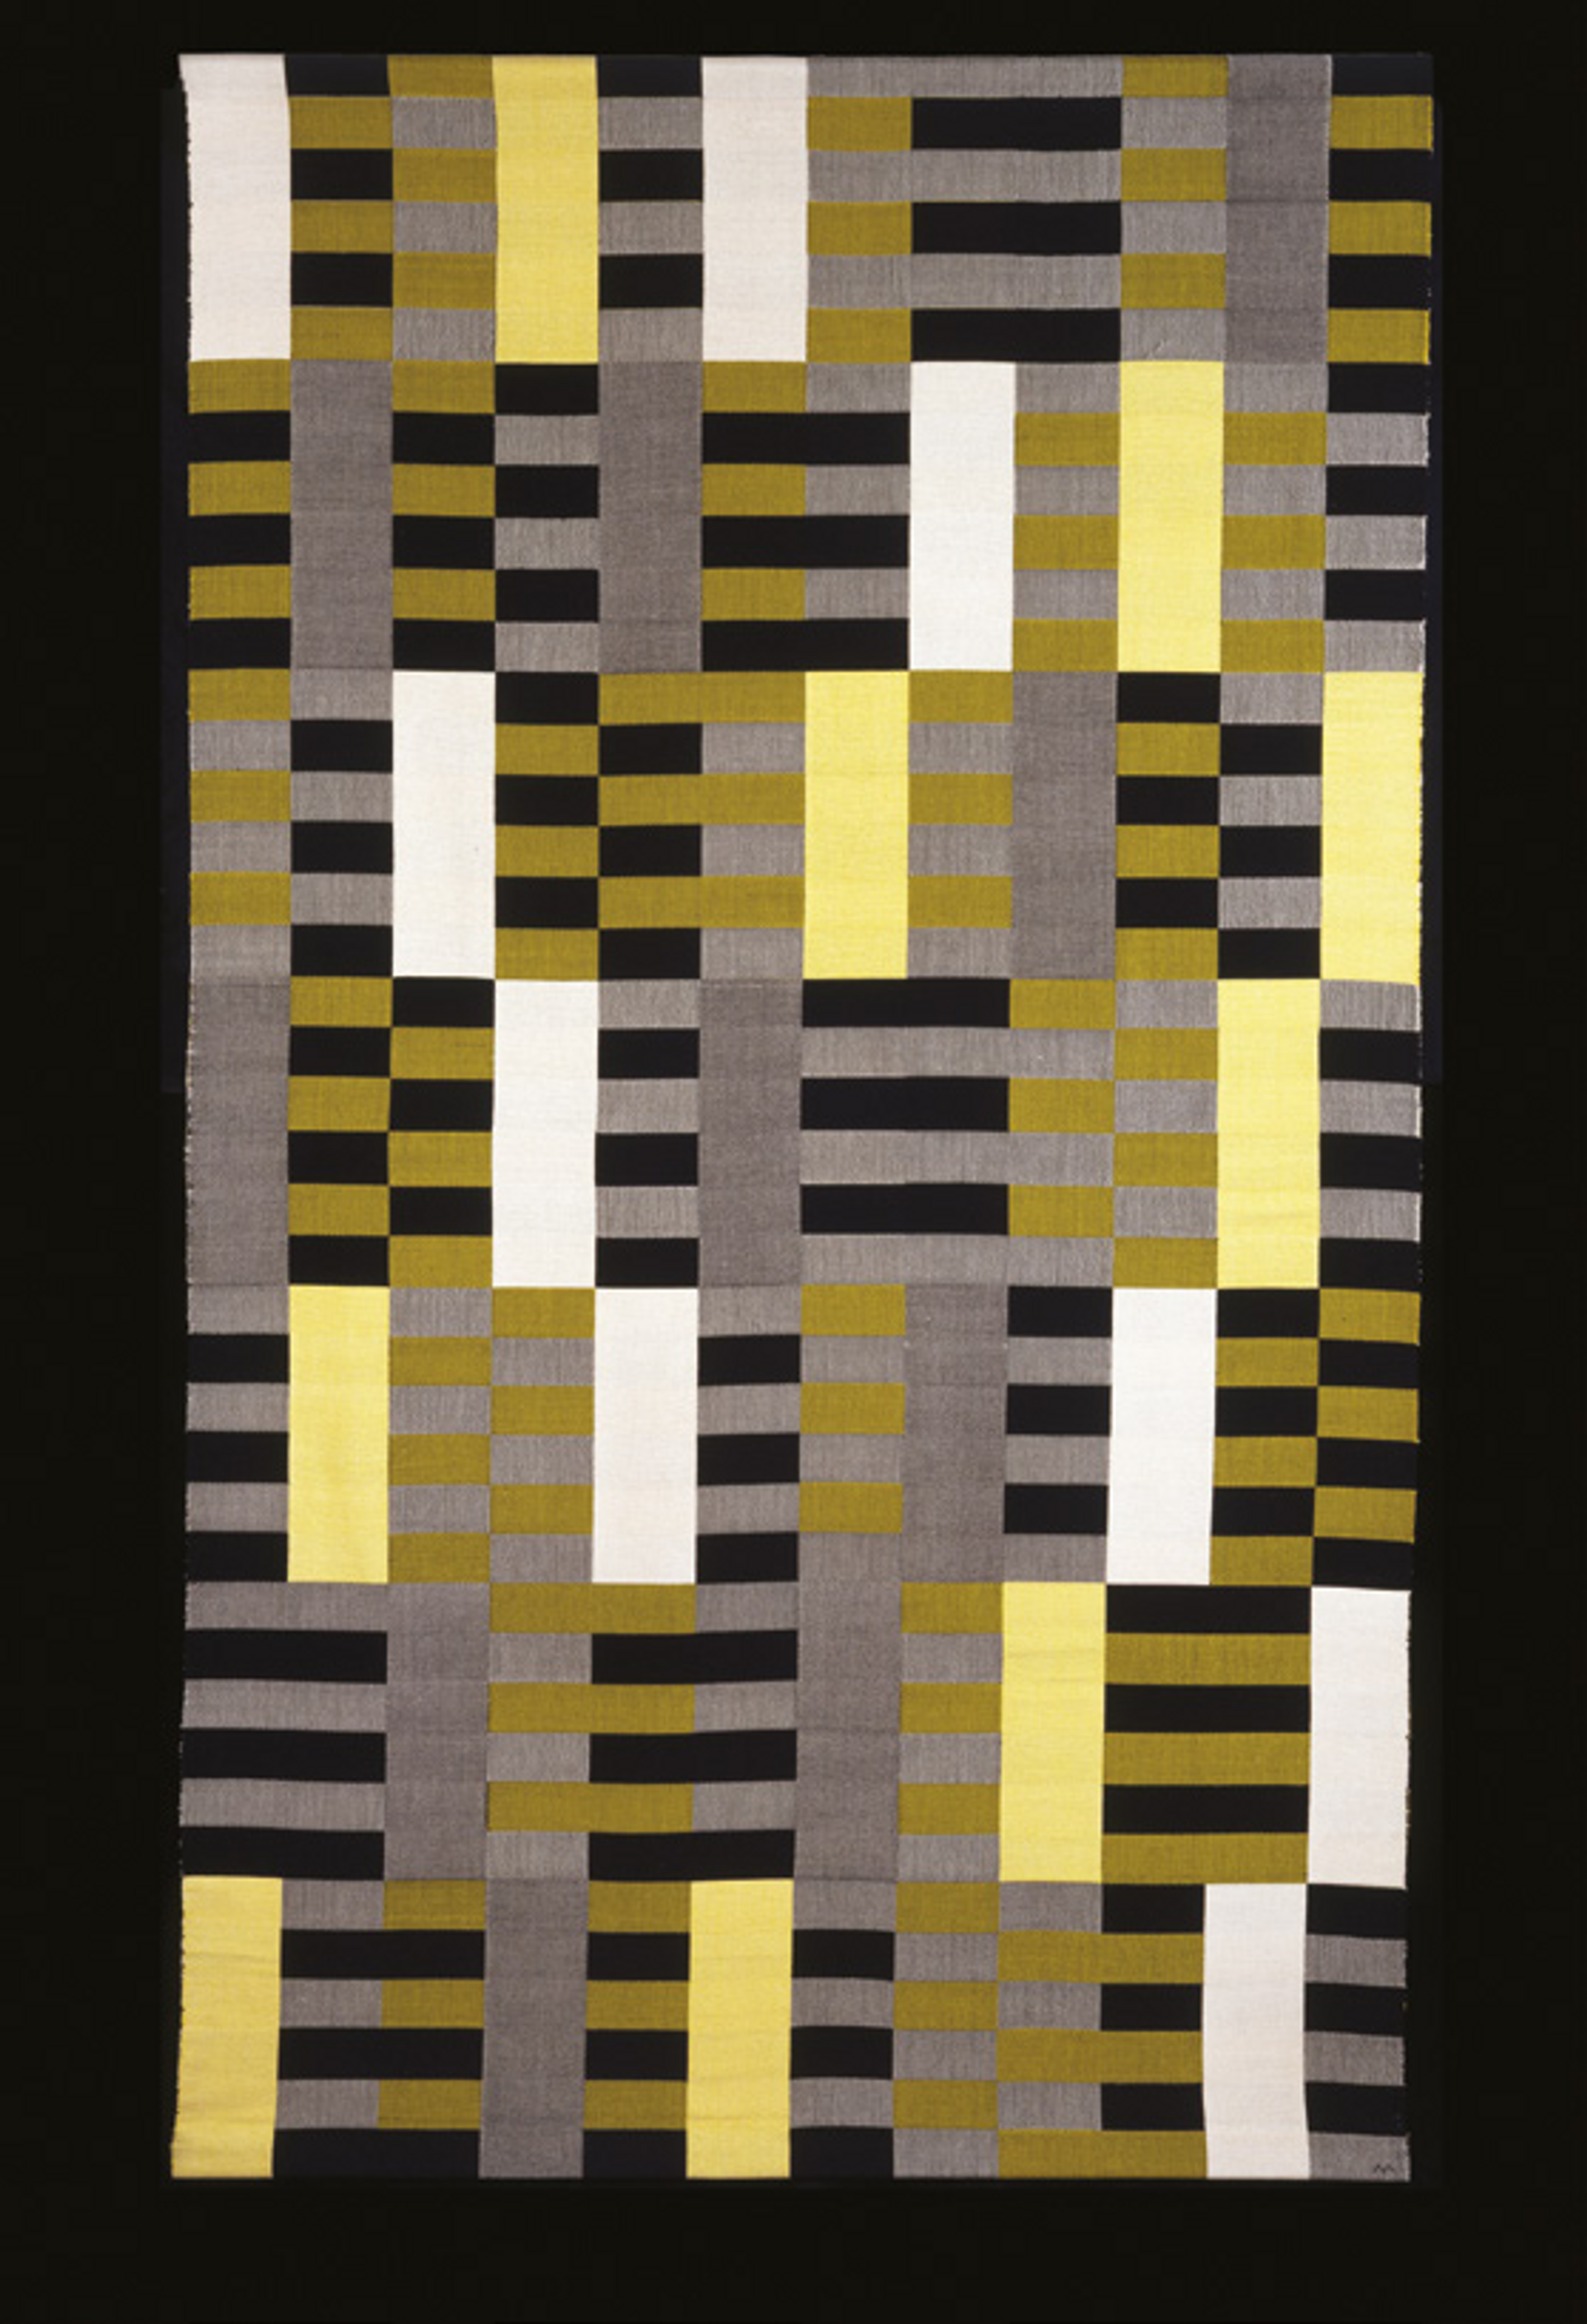 Anni Albers, Black White Yellow, 1926-1967, soie tissée, rayonne et lin (conception : Anni Albers, 1926 ; réalisation : Gunta Stölz, 1967), Victoria and Albert Museum, Londres. © 2021 The Josef and Anni Albers Foundation